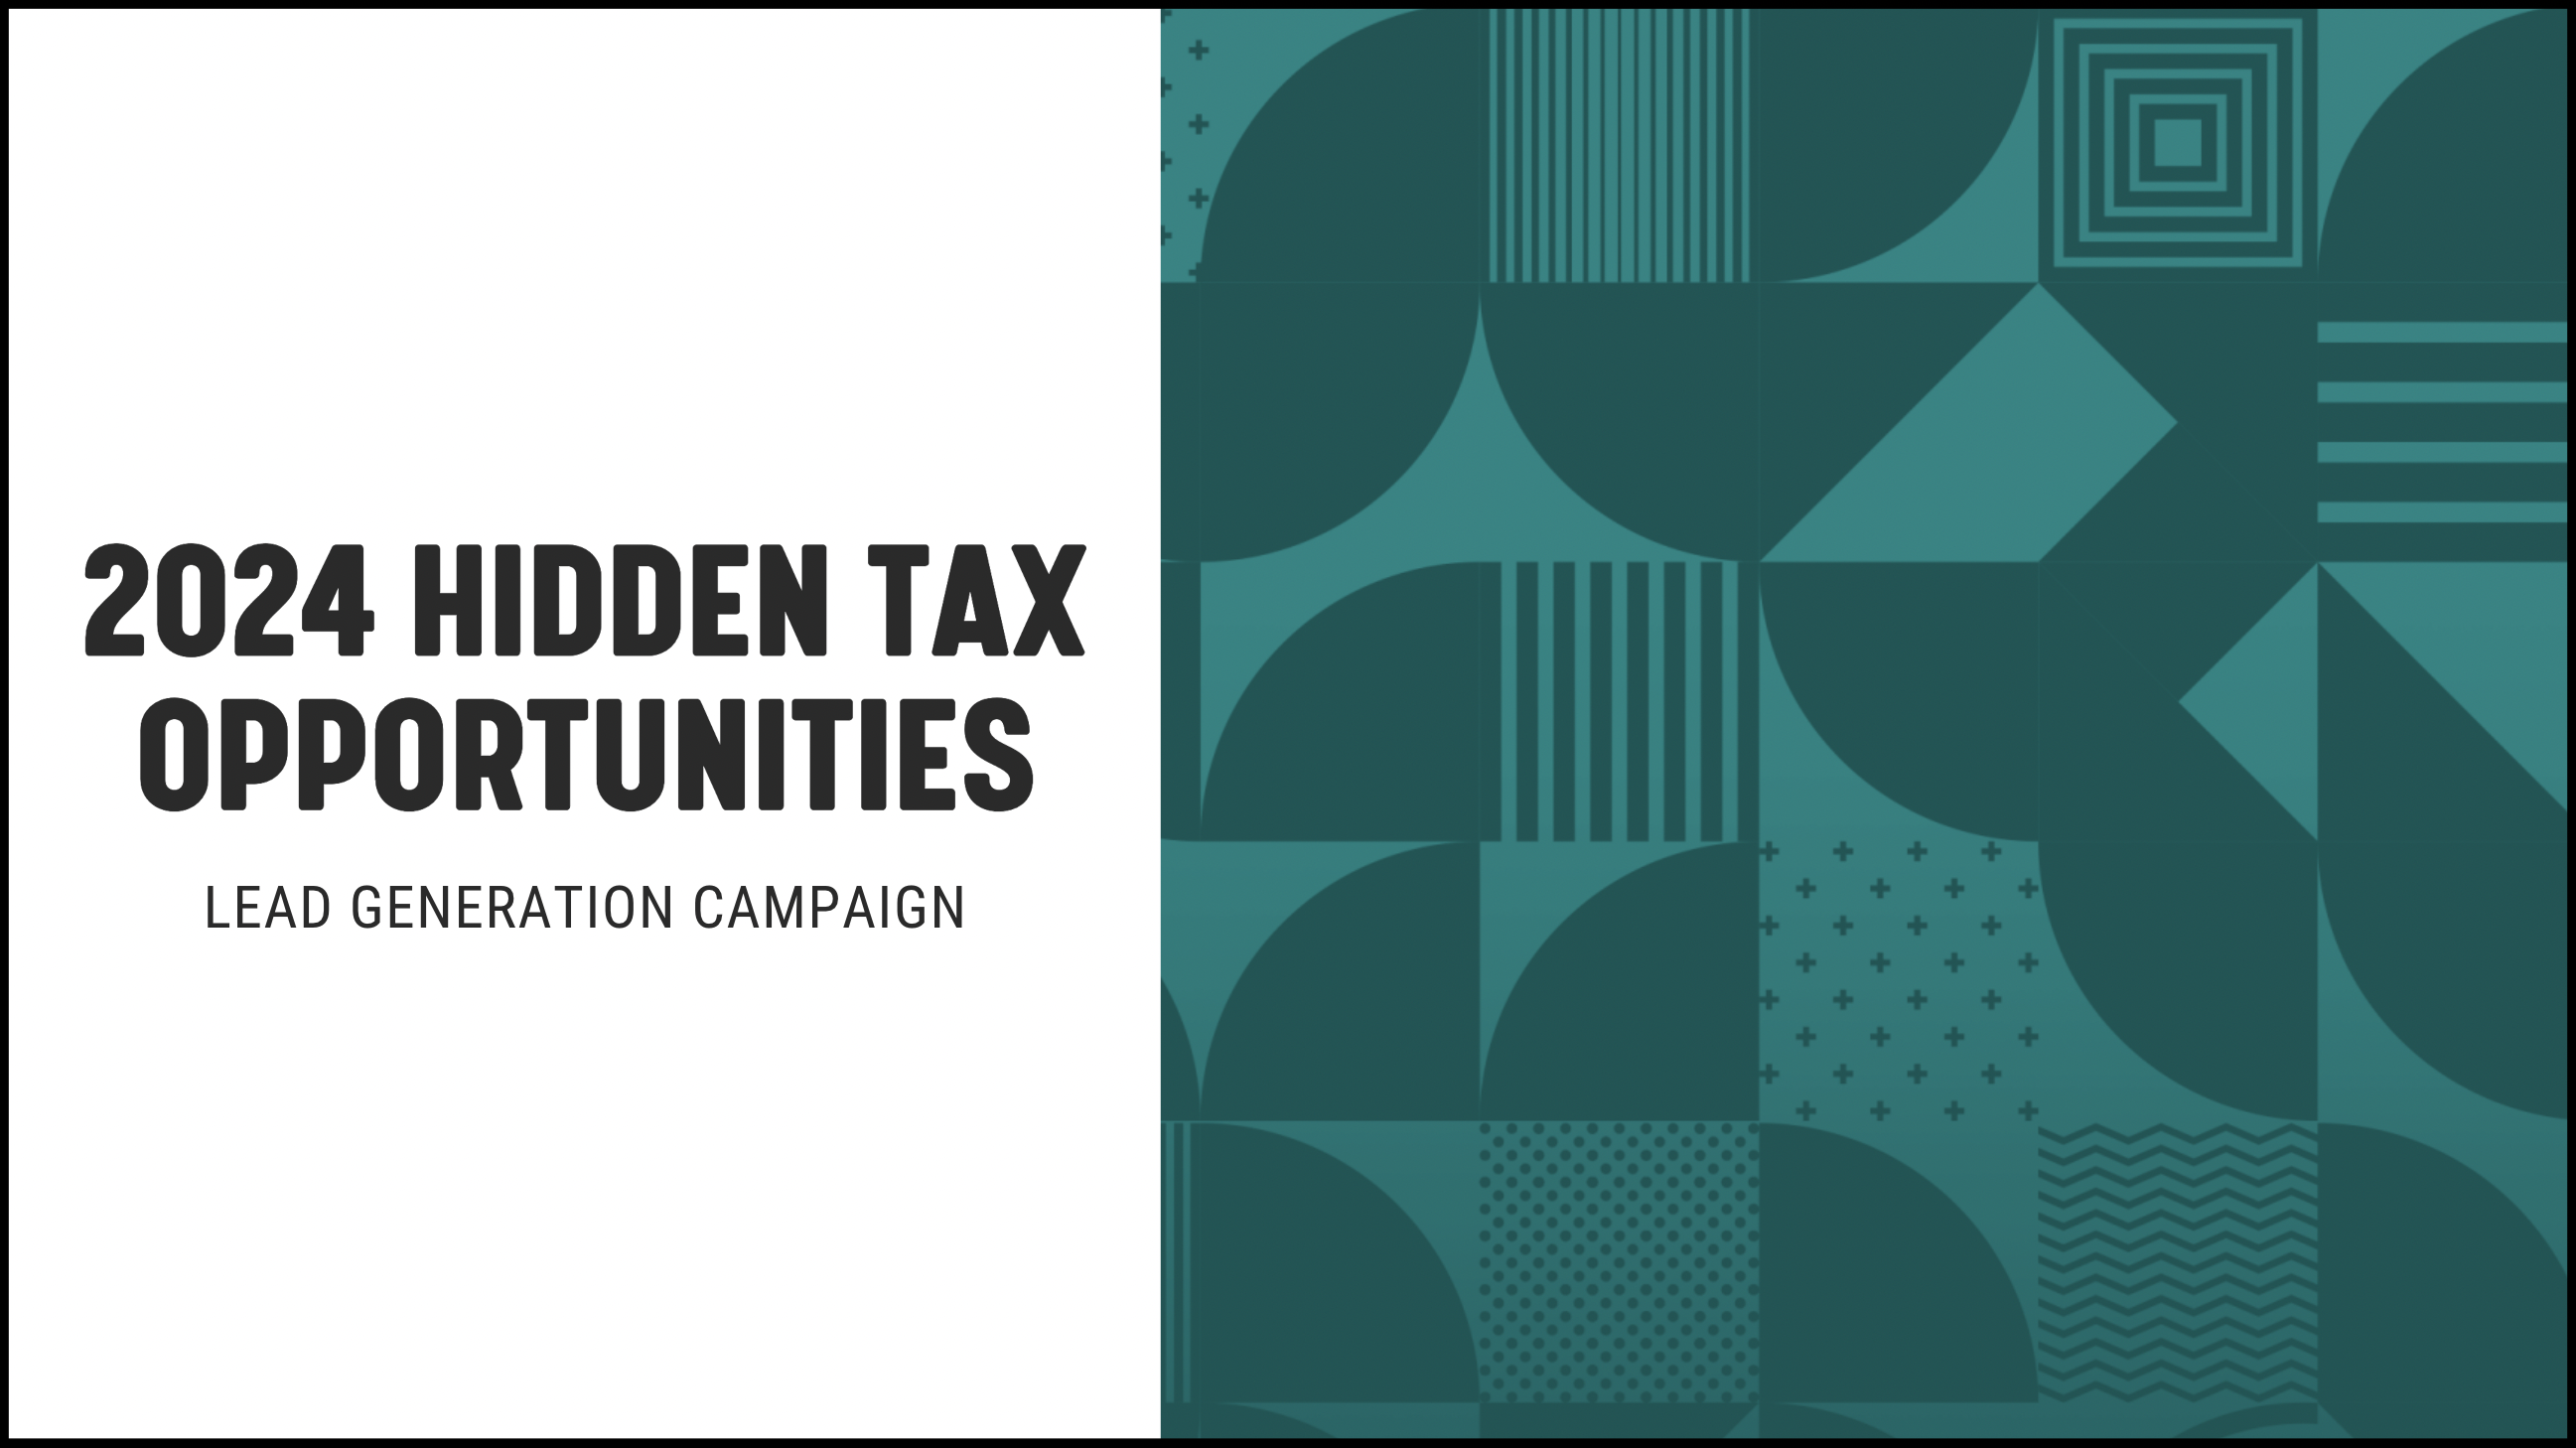 [NEW] 2024 Hidden Tax Opportunities - Lead Generation Campaign for Financial Advisors